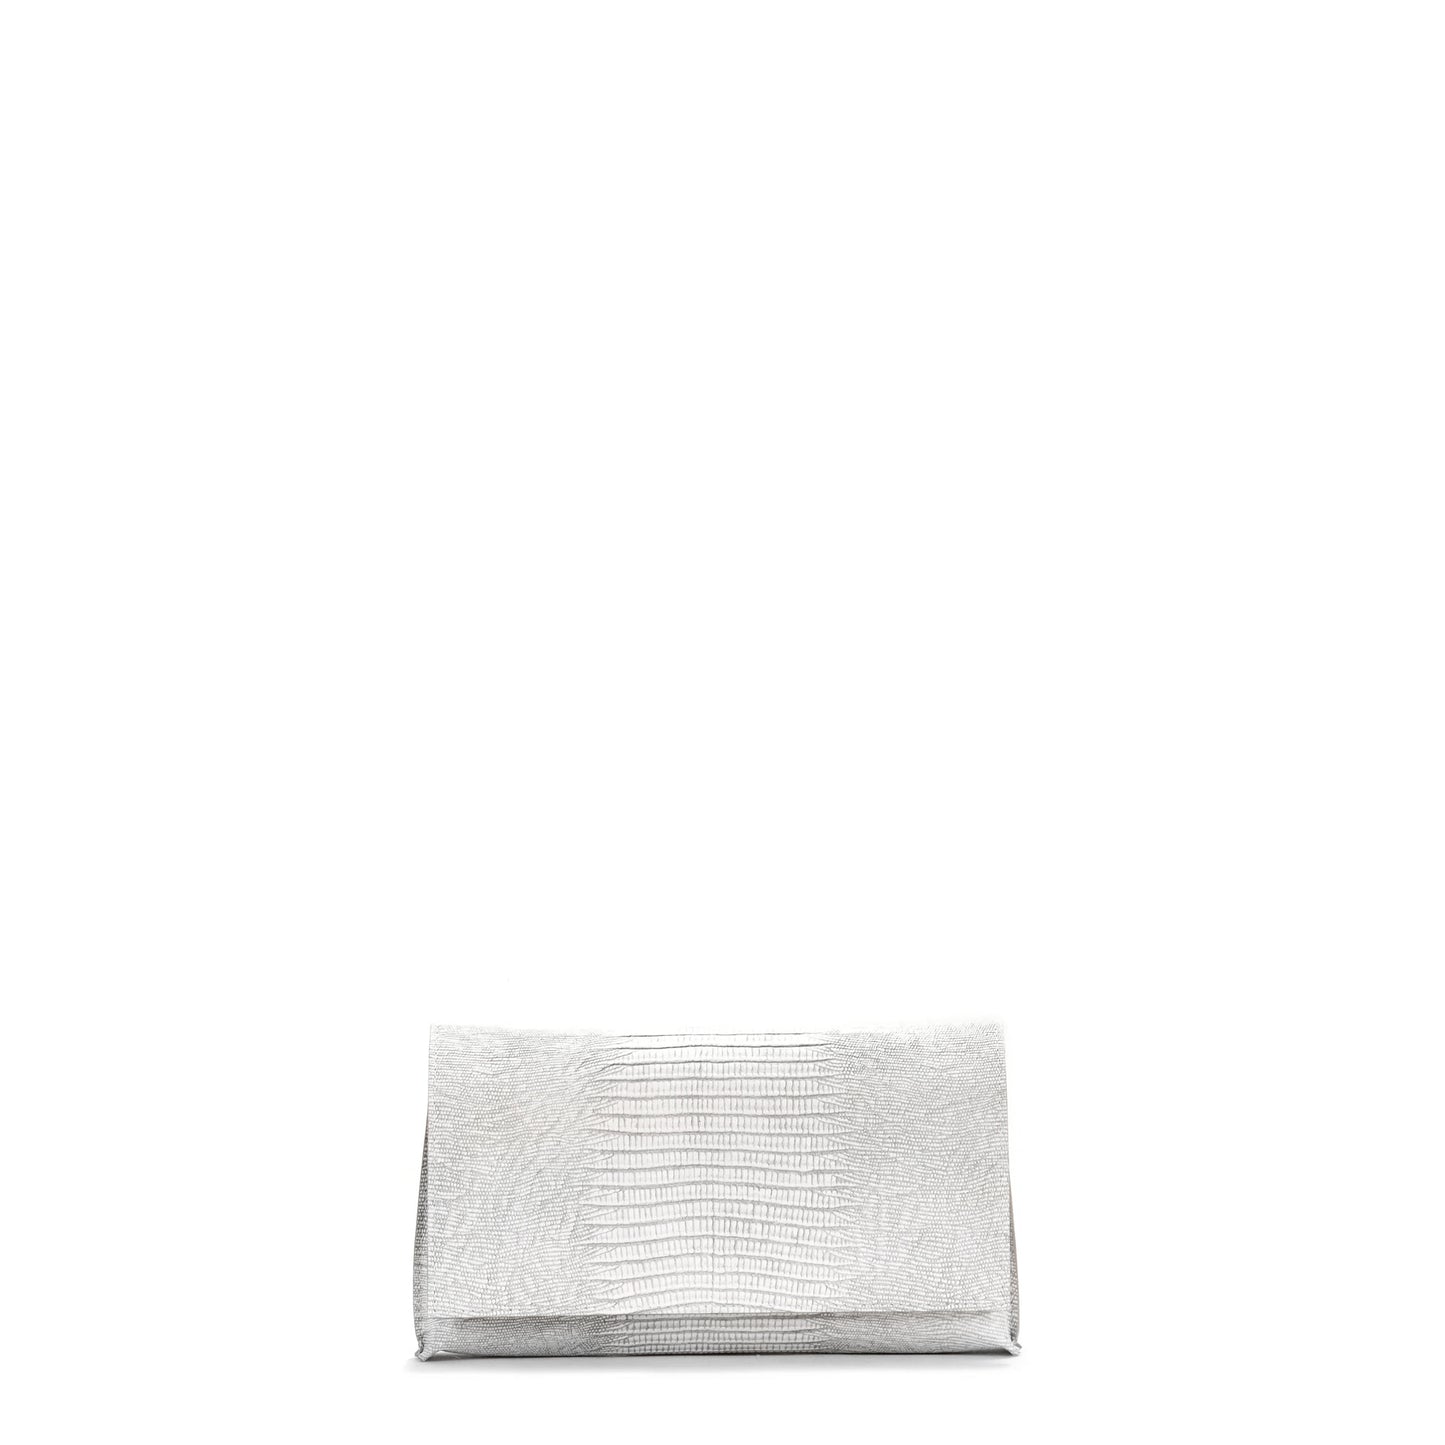 FOLDOVER CLUTCH ANTIQUE WHITE EMBOSSED LIZARD